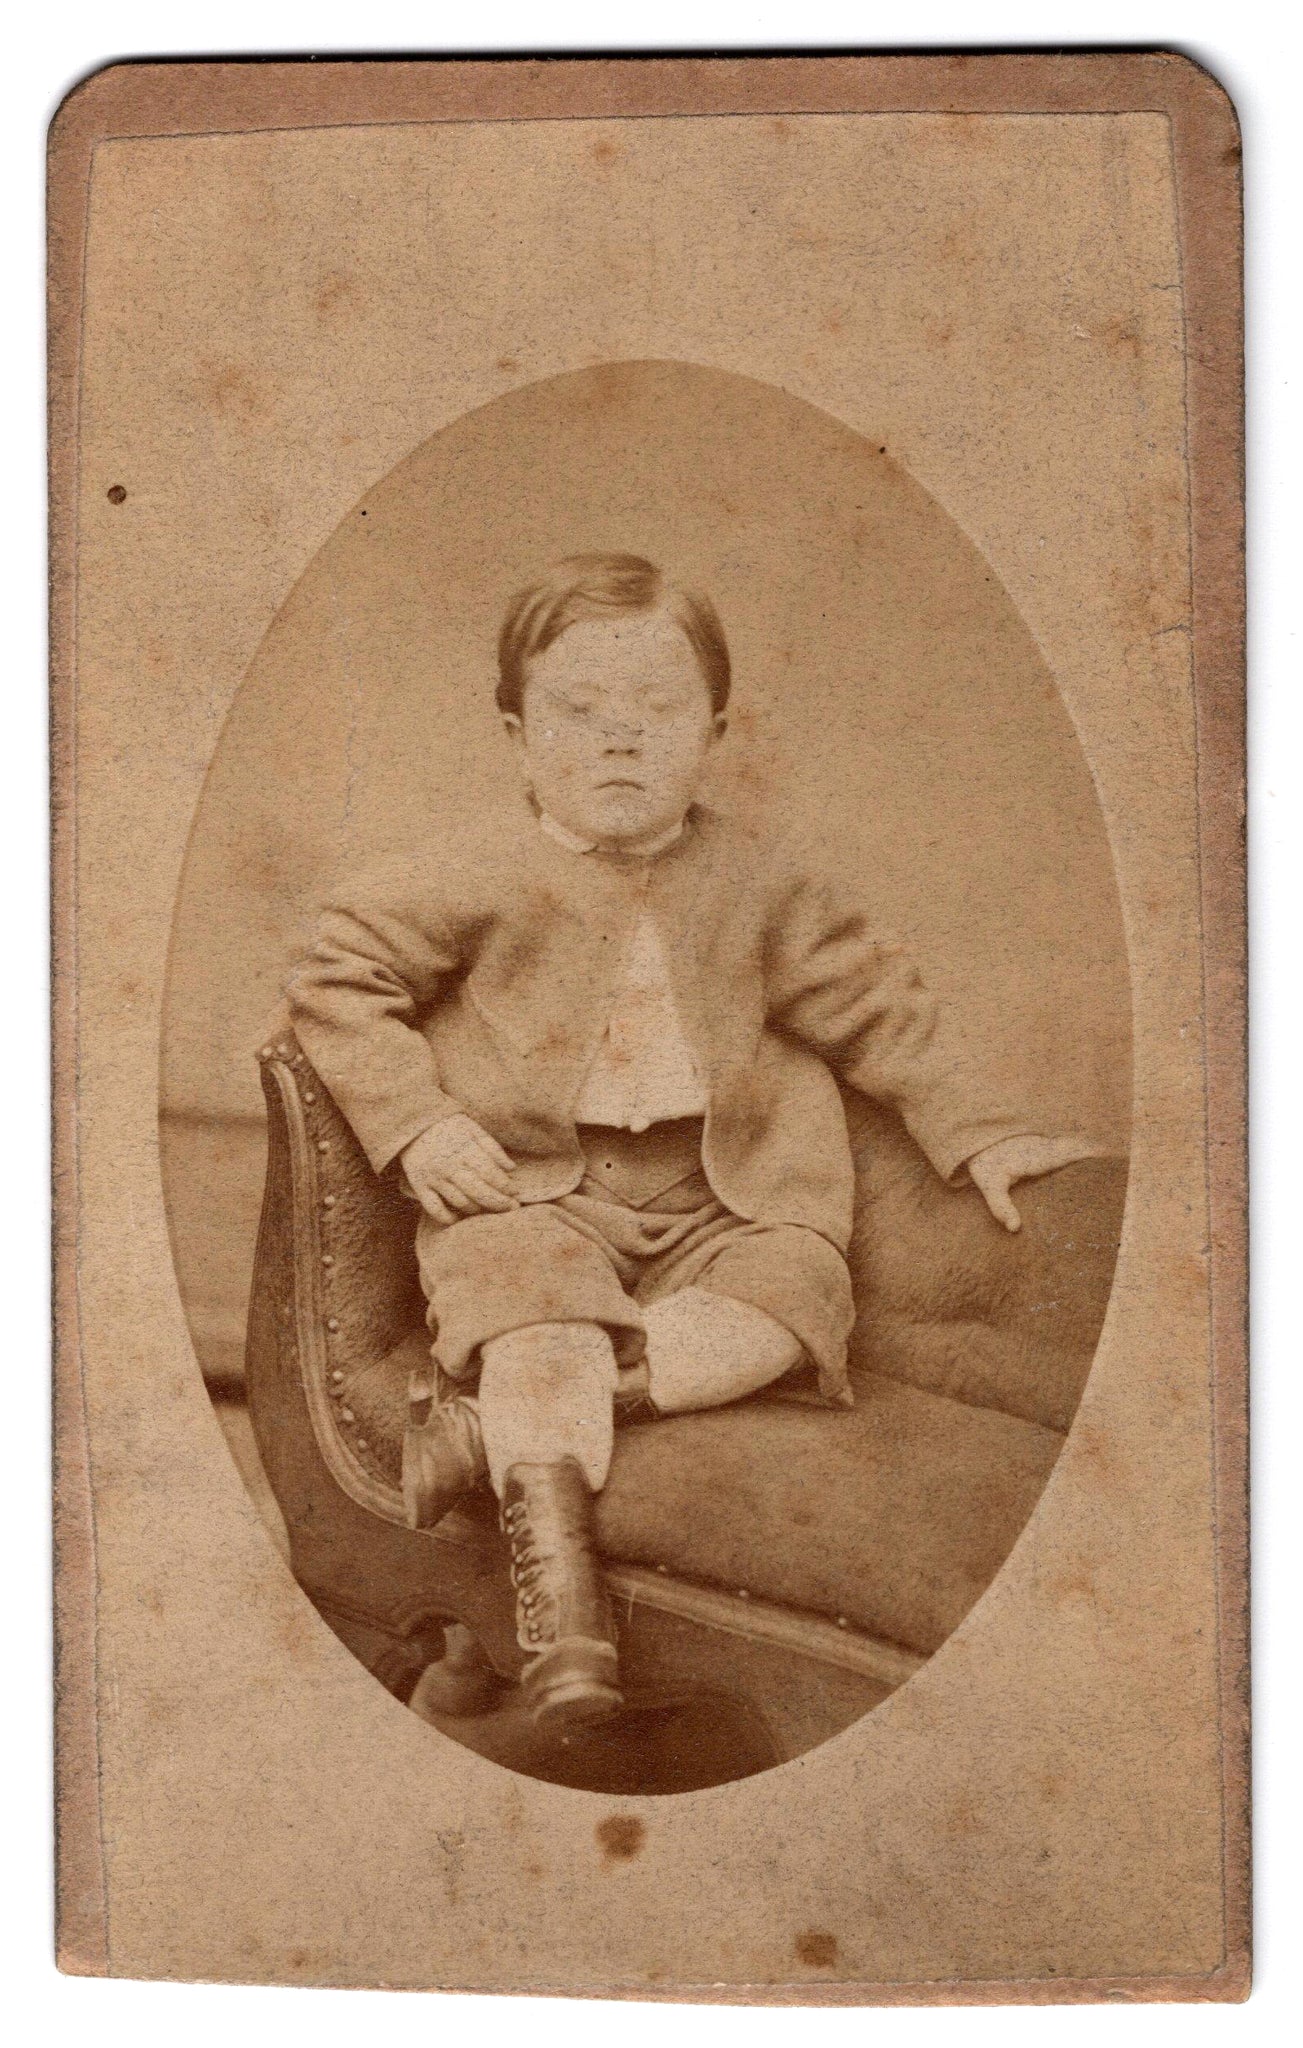 Studio portrait of a boy with his eyes closed (Victorian post-mortem photography)